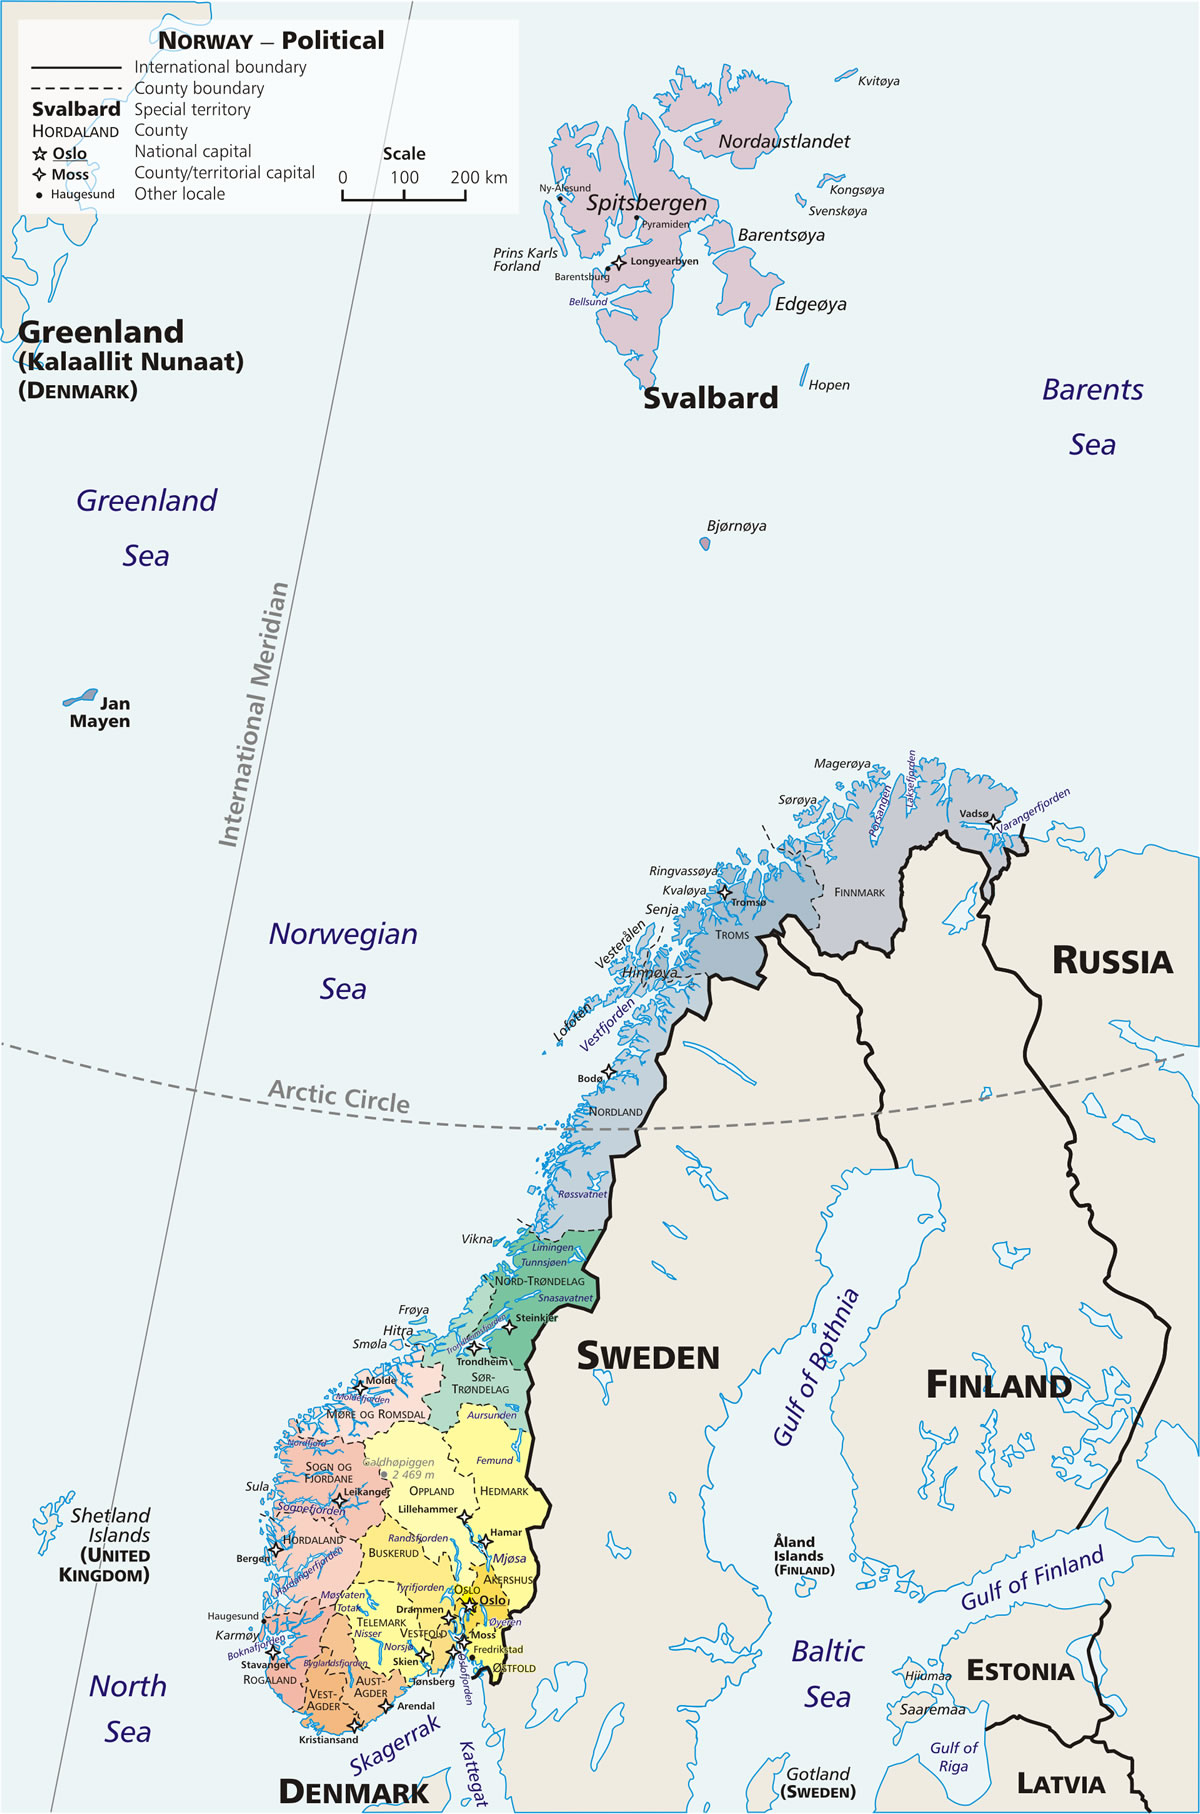 Norway political map